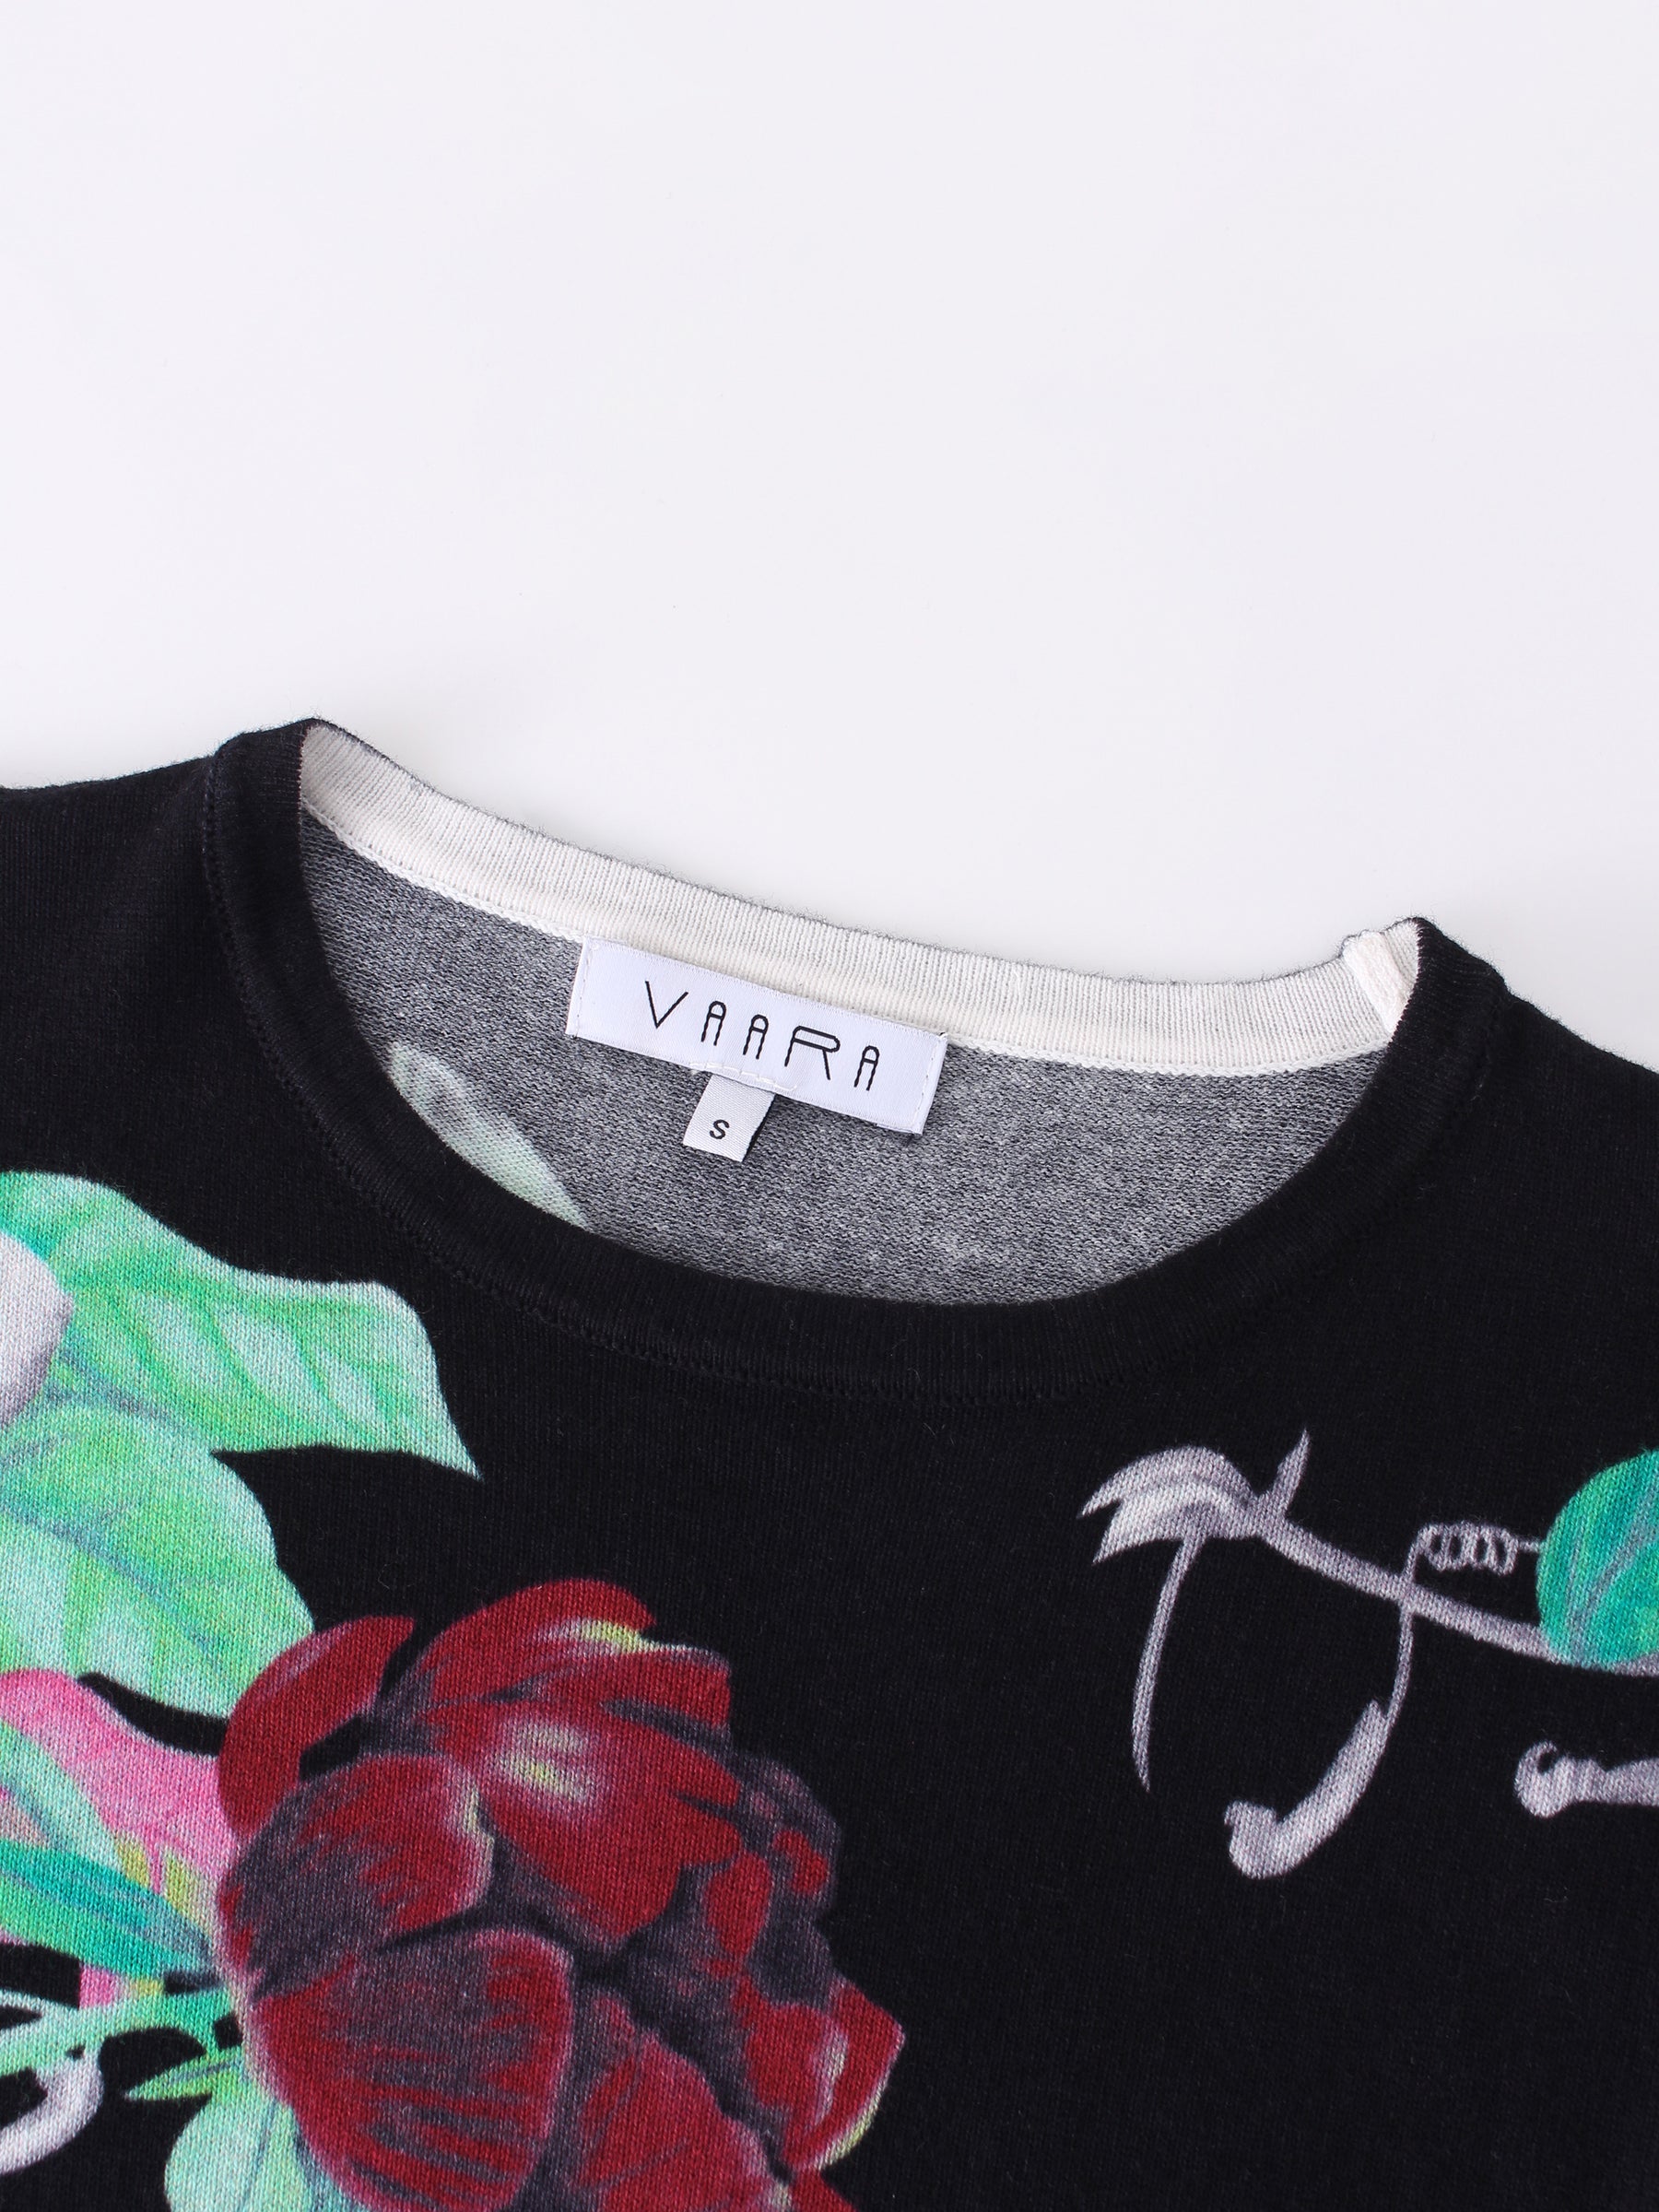 Printed Sweater-Floral Bunch